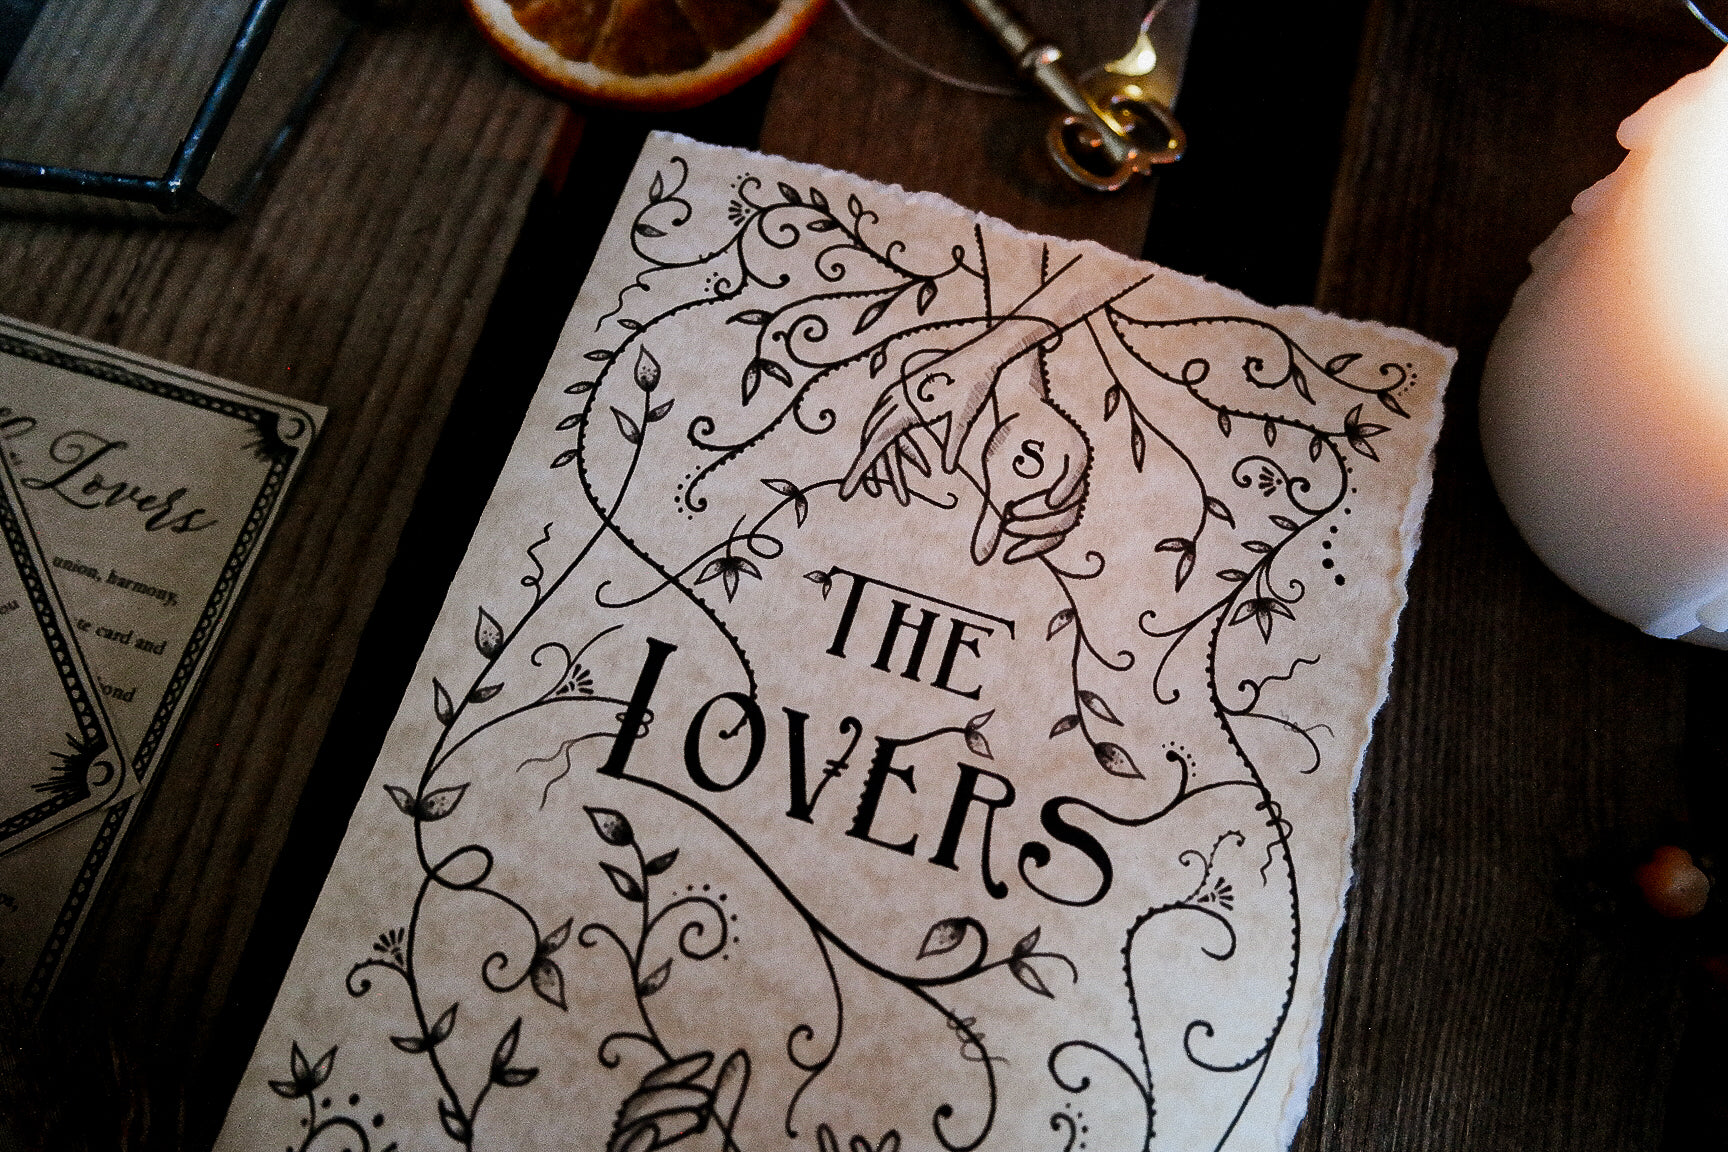 'The Lovers' Greeting Card